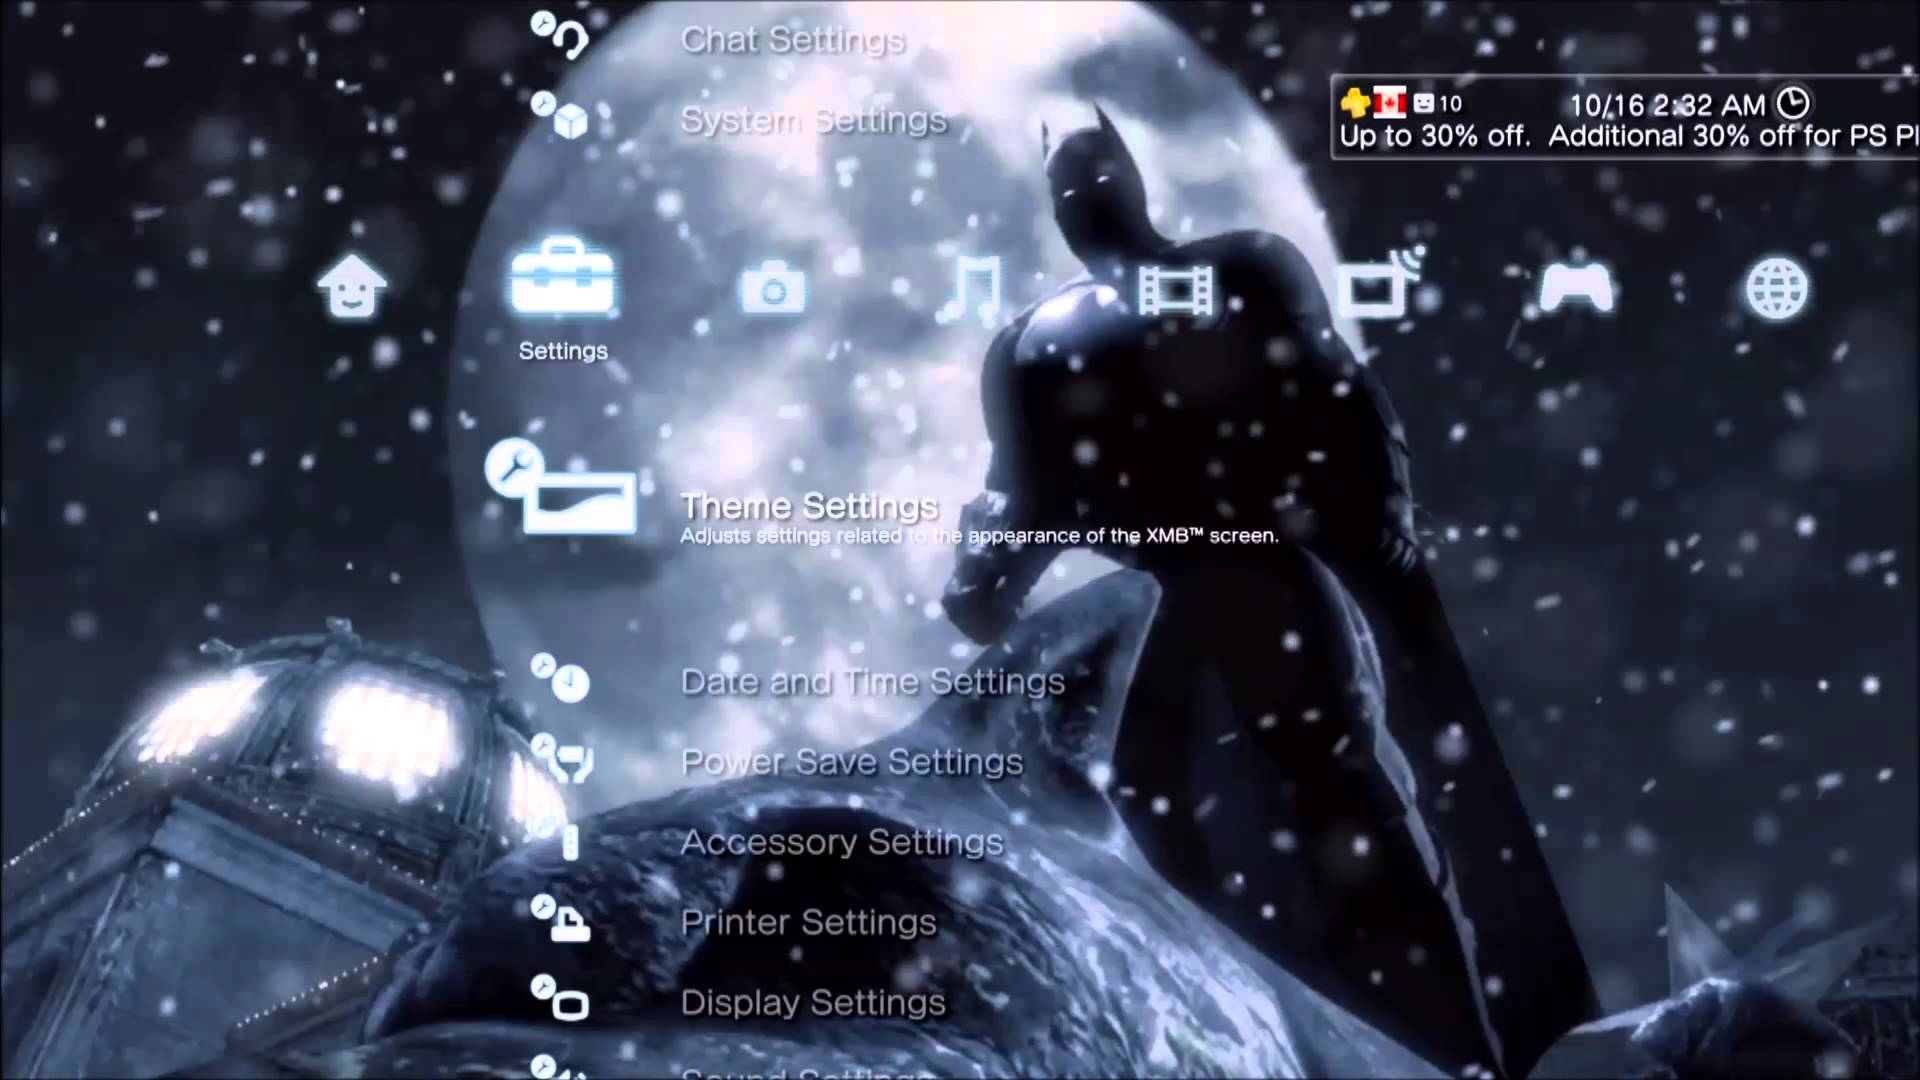 Ps3 wallpapers and themes